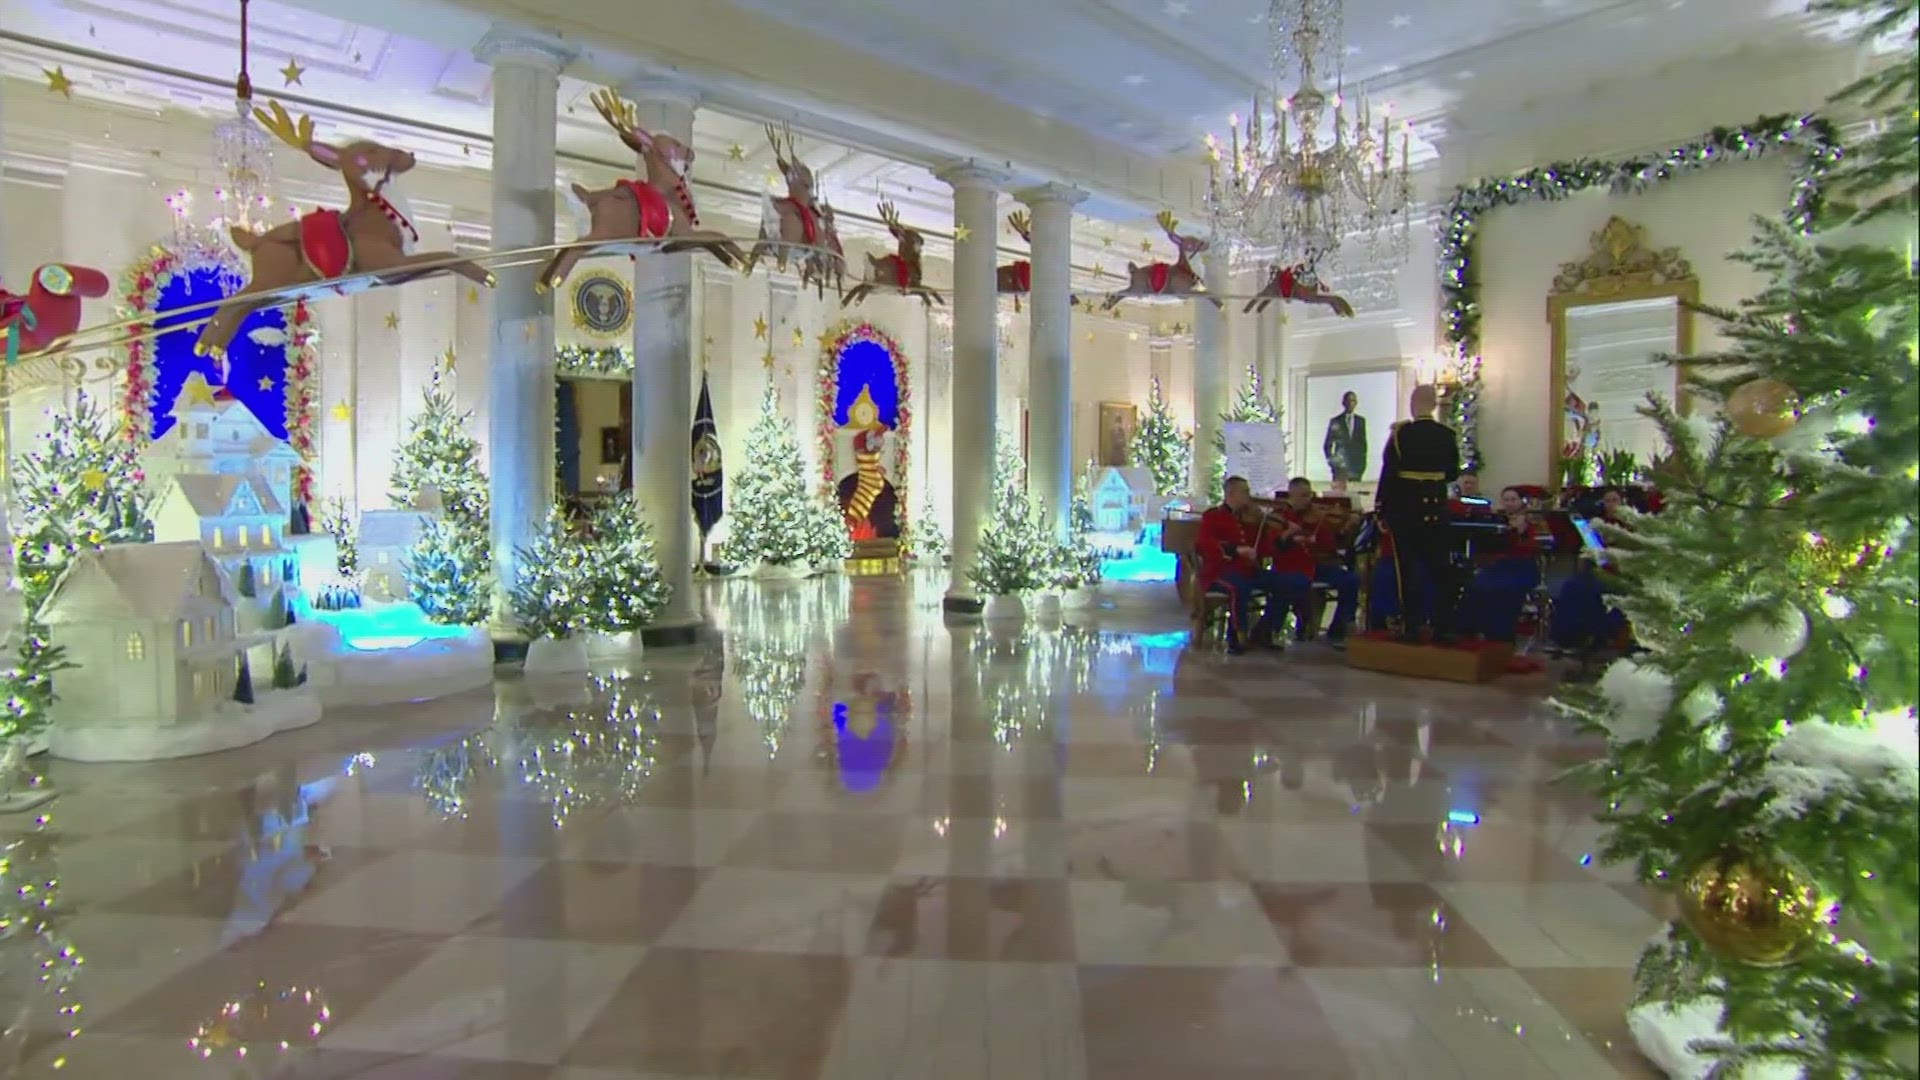 Stephen Brown, owner of Glitterville Studios, is known for his unique holiday decor. This year, he's worked with possibly his biggest client yet—the White House!